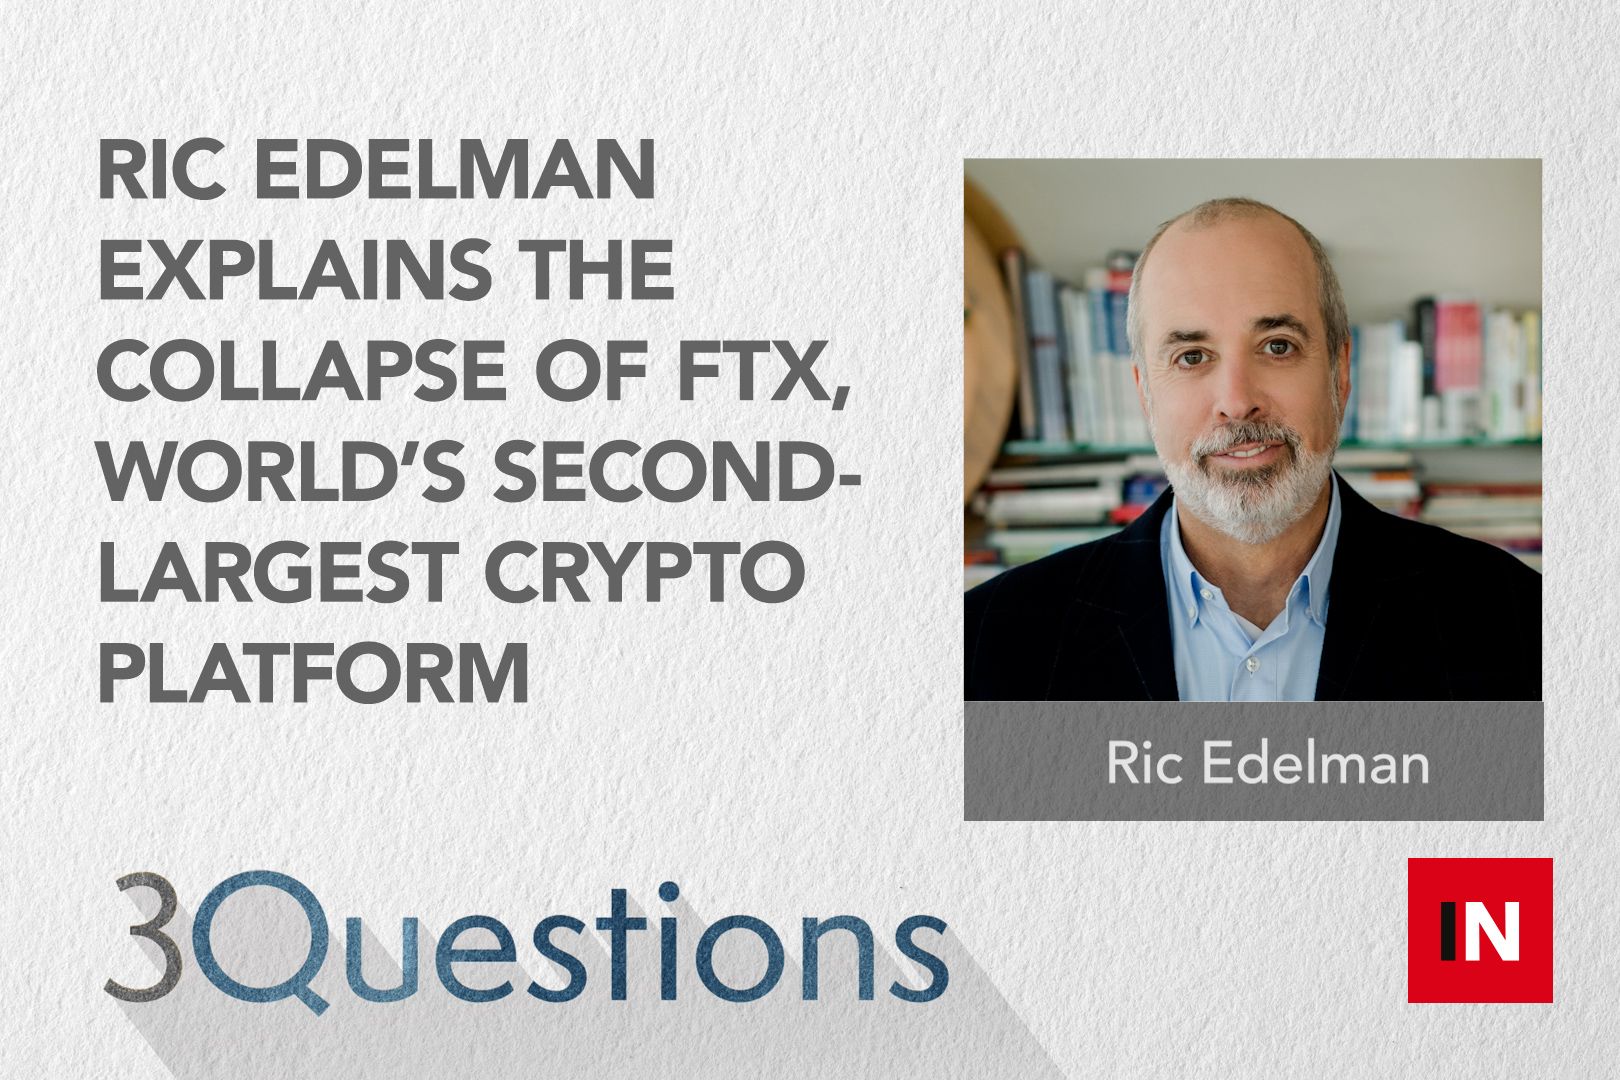 Ric Edelman explains the collapse of FTX, world’s second-largest crypto platform